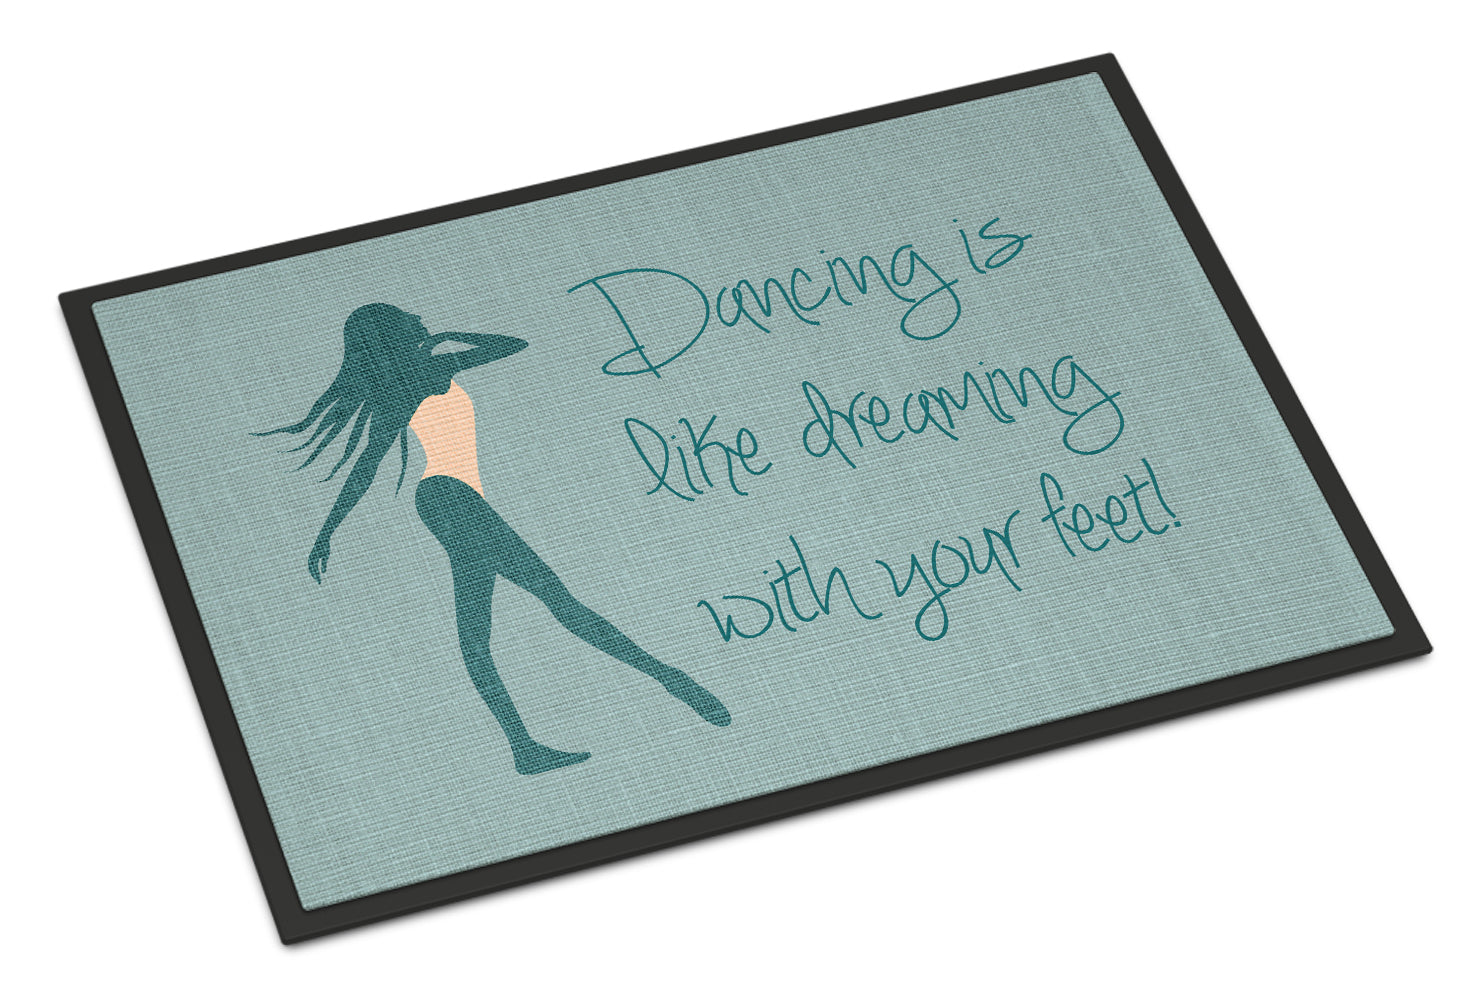 Dancing is Like Dreaming #2 Indoor or Outdoor Mat 18x27 BB5380MAT - the-store.com